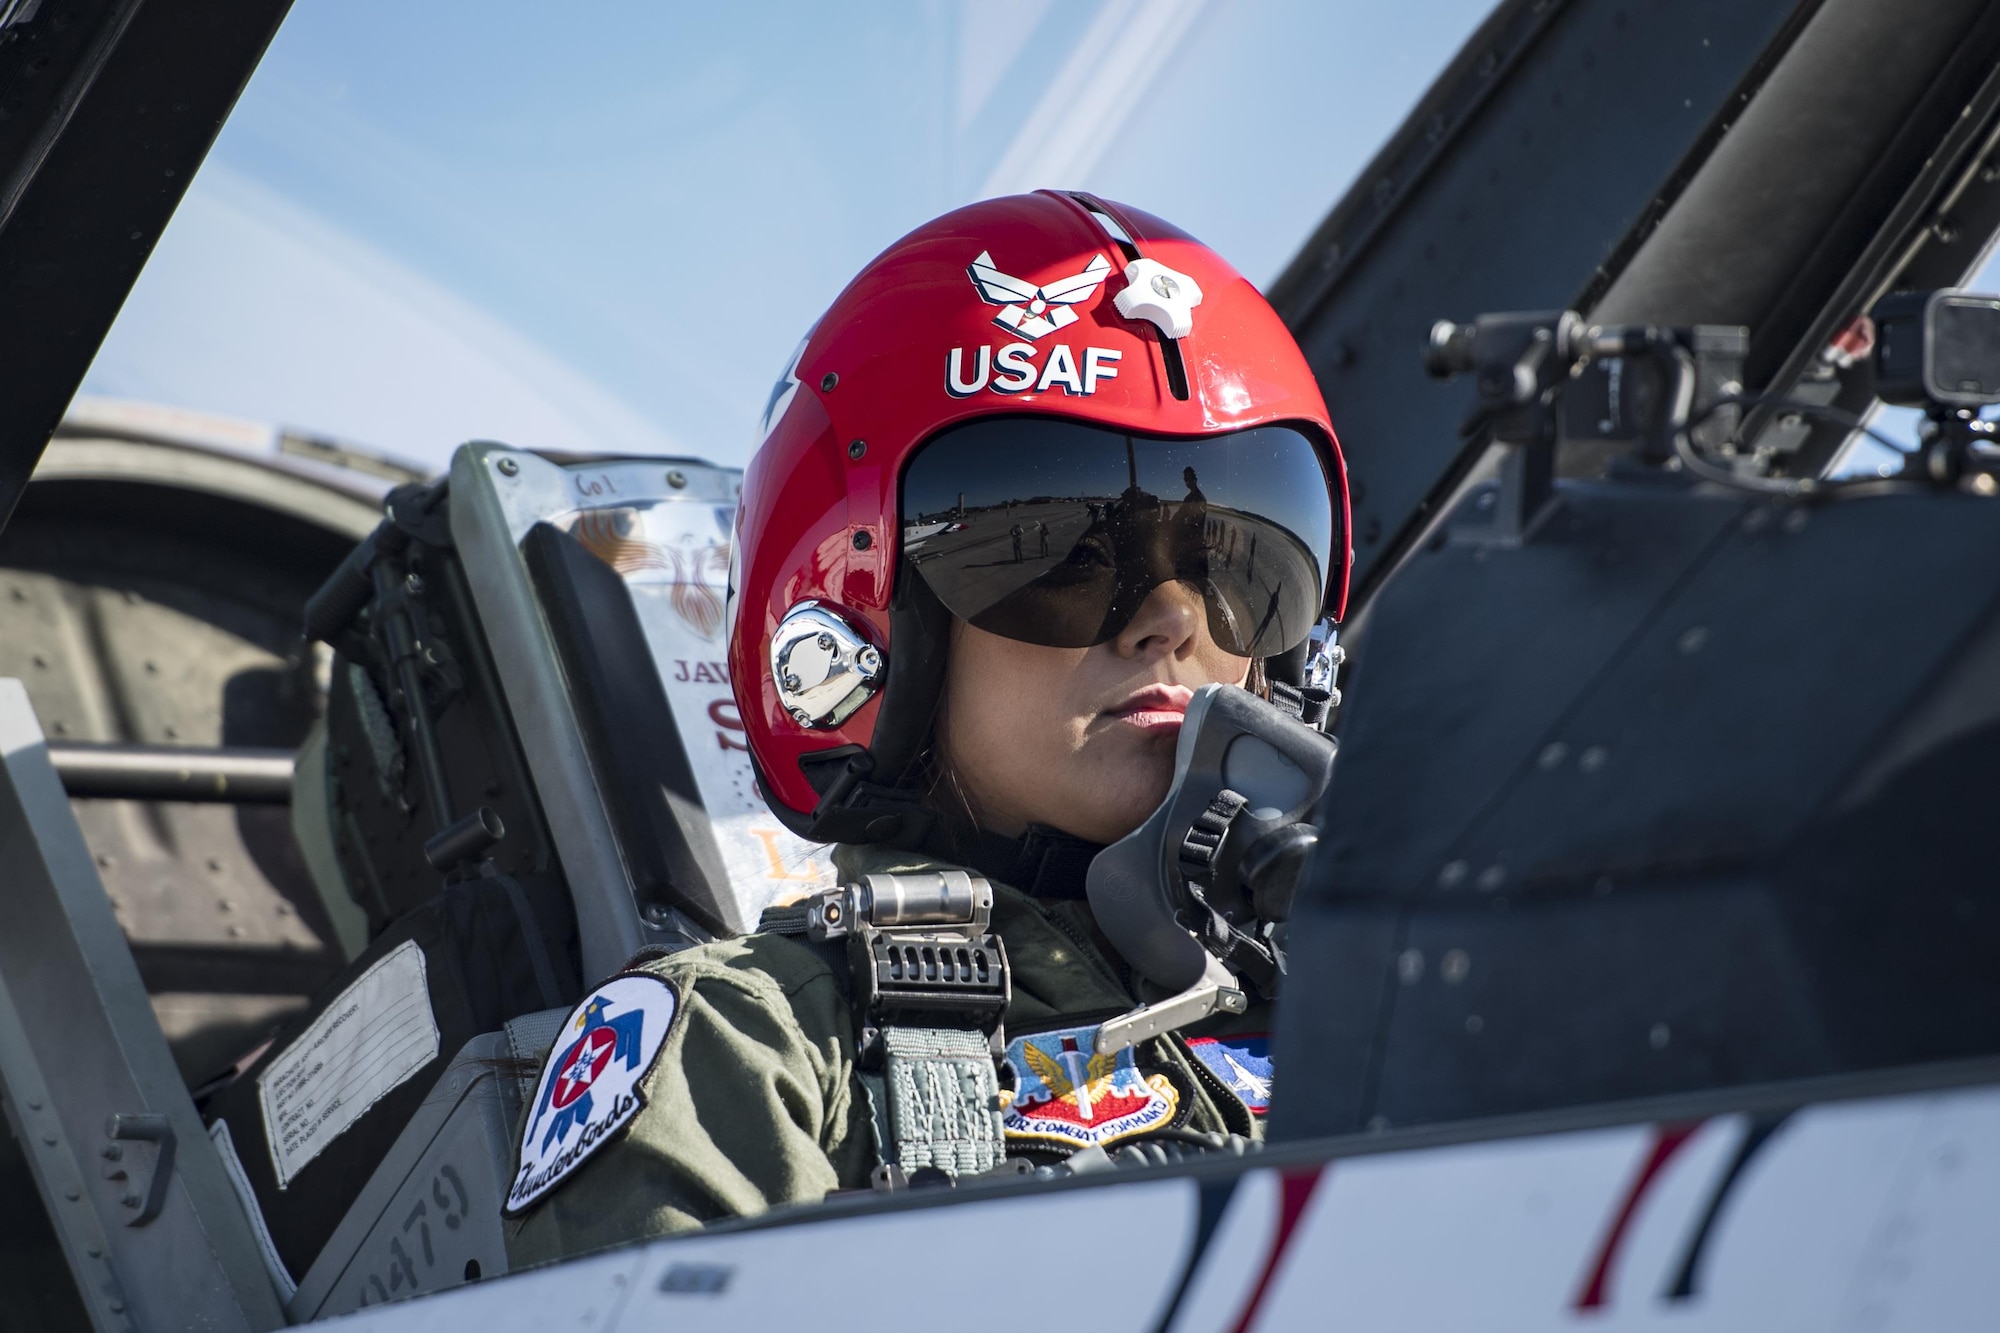 Noelani Mathews, multimedia journalist, sits in the cockpit of an F-16D Fighting Falcon before her media flight, , Oct. 27, 2017, at Moody Air Force Base, Ga. The U.S. Air Force Thunderbirds, based out of Nellis Air Force Base, Nev., are the Air Force’s premier aerial demonstration team, performing at air shows and special events worldwide. (U.S. Air Force photo by Senior Airman Janiqua P. Robinson)